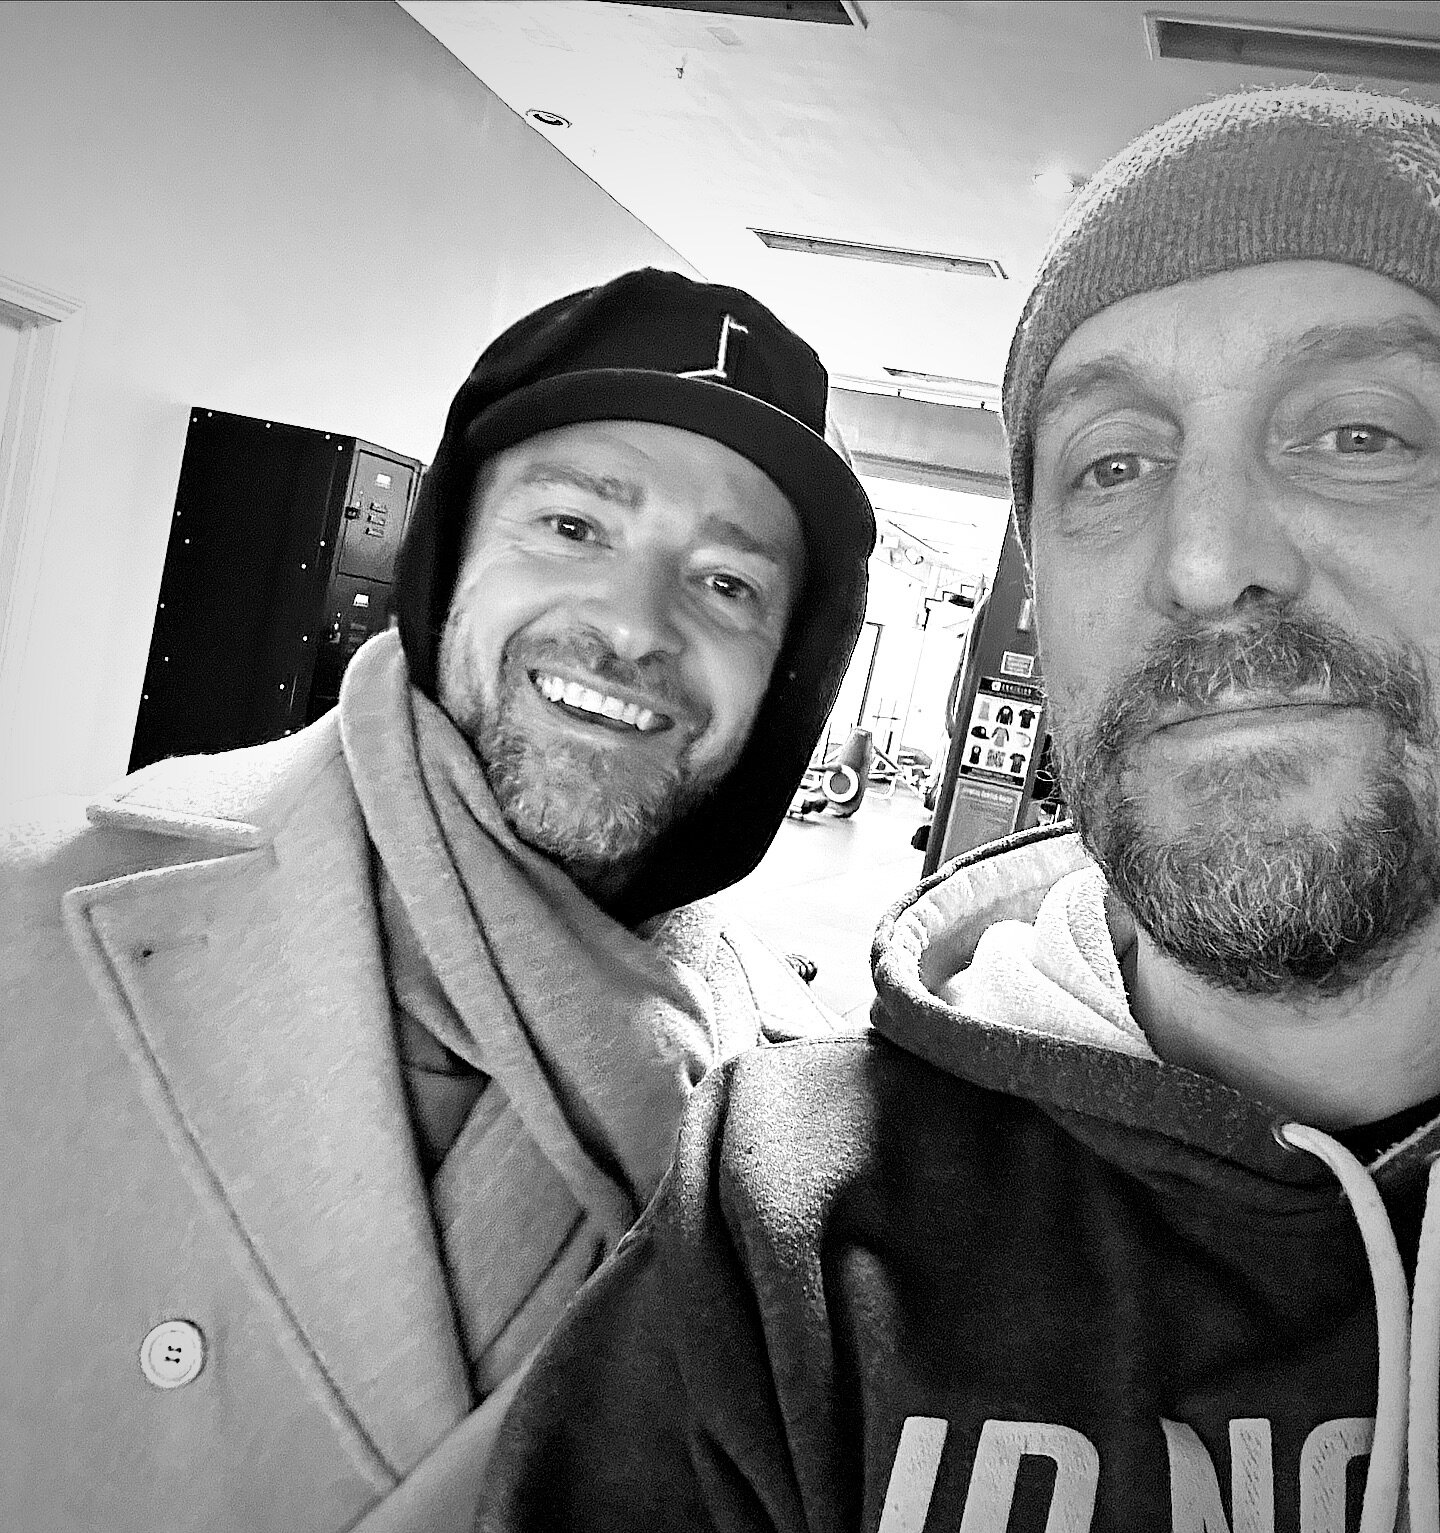 Look who stopped by for a workout! Thank #justintimberlake for always supporting your hometown and local businesses! 

#travelworkout #envisionmemphis #envisionfit #downtownmemphis #move4life #memphisfit #choose901 #localbusiness #selfcare #ilovememp